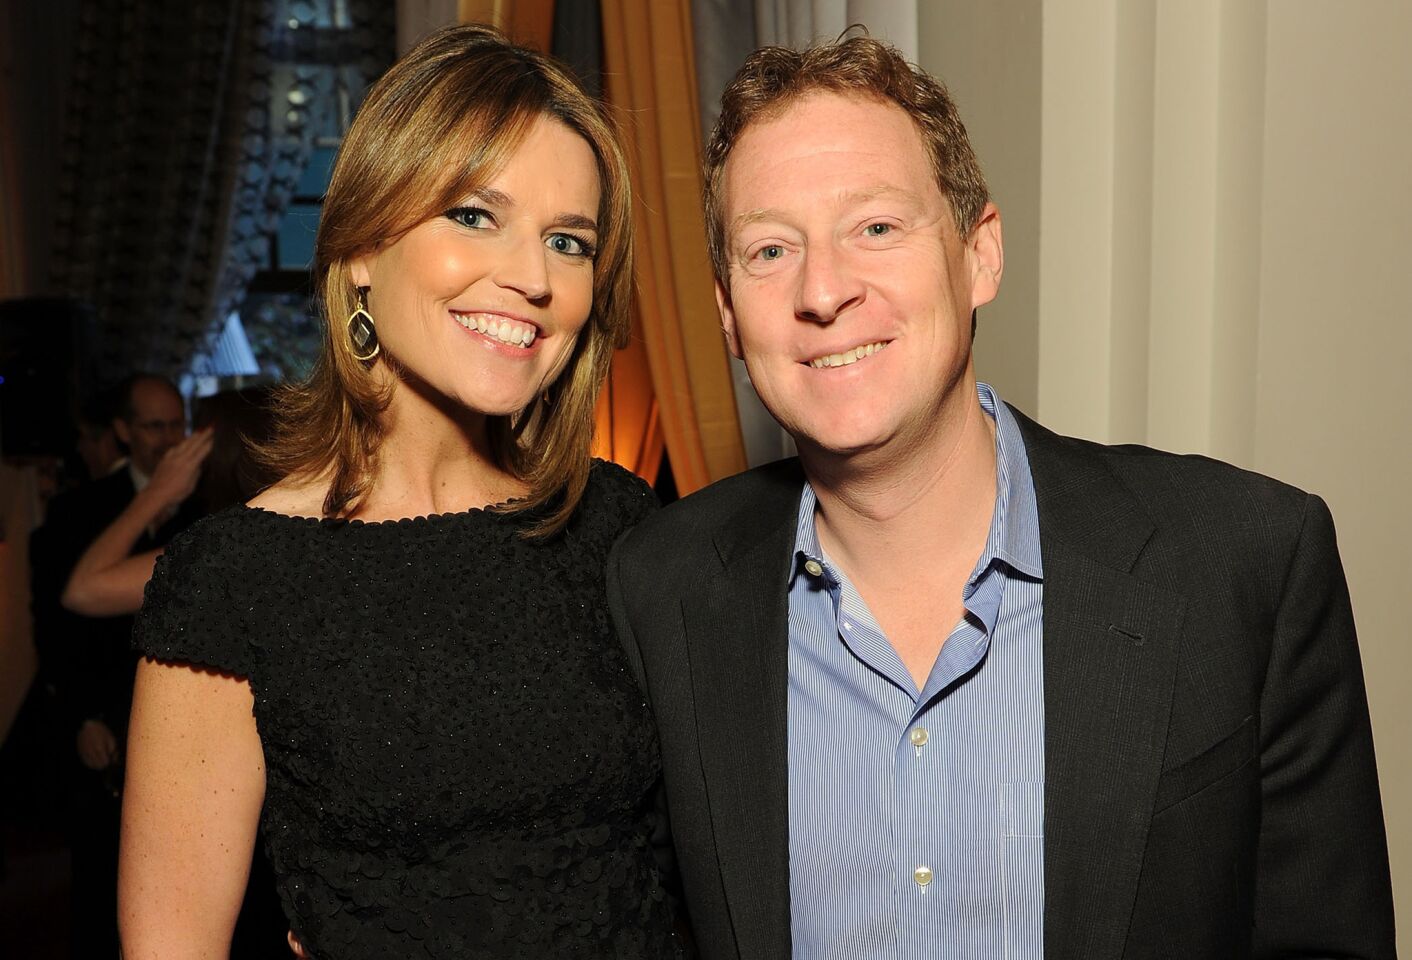 "Today" show cohost Savannah Guthrie and communications strategist husband Michael Feldman are now first-time parents to Vale Guthrie Feldman. The couple married in March 2014 and announced their pregnancy during the festivities.